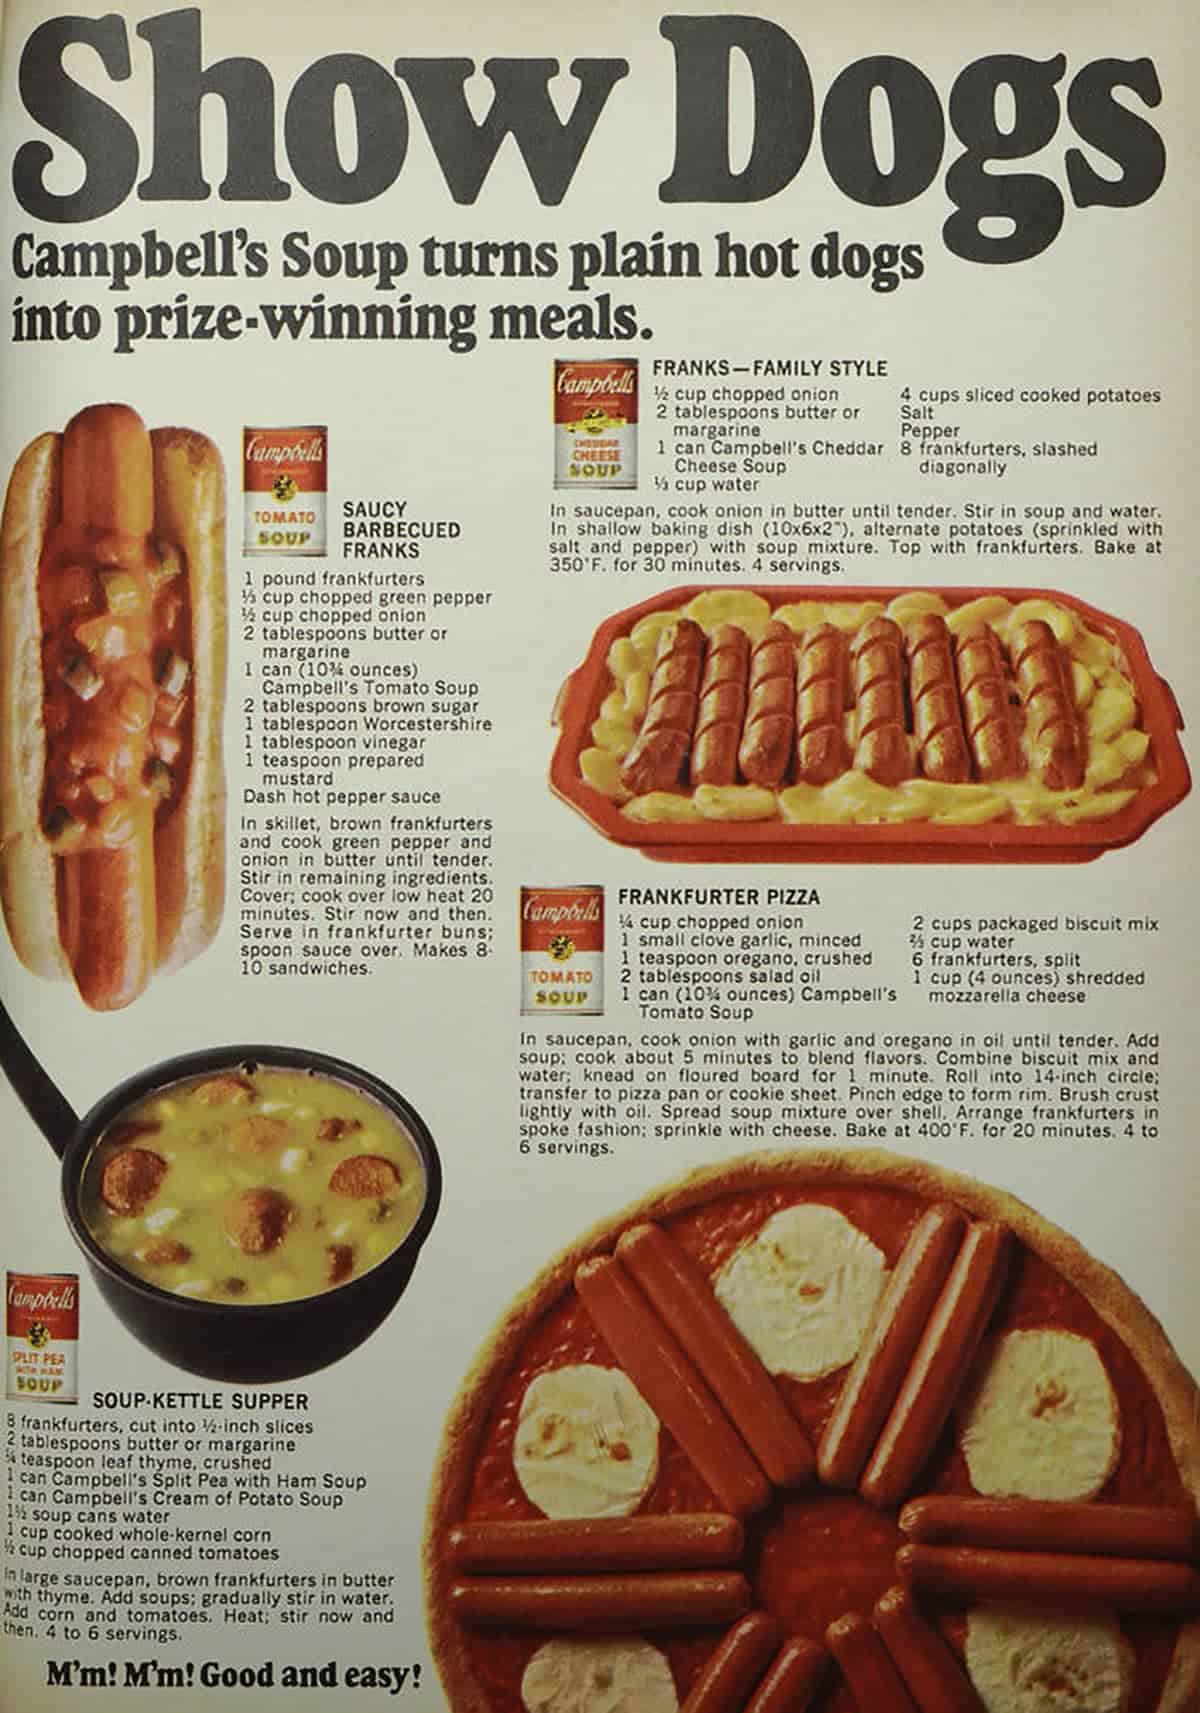 Cambell's Ad Showing Soup and Hot Dogs